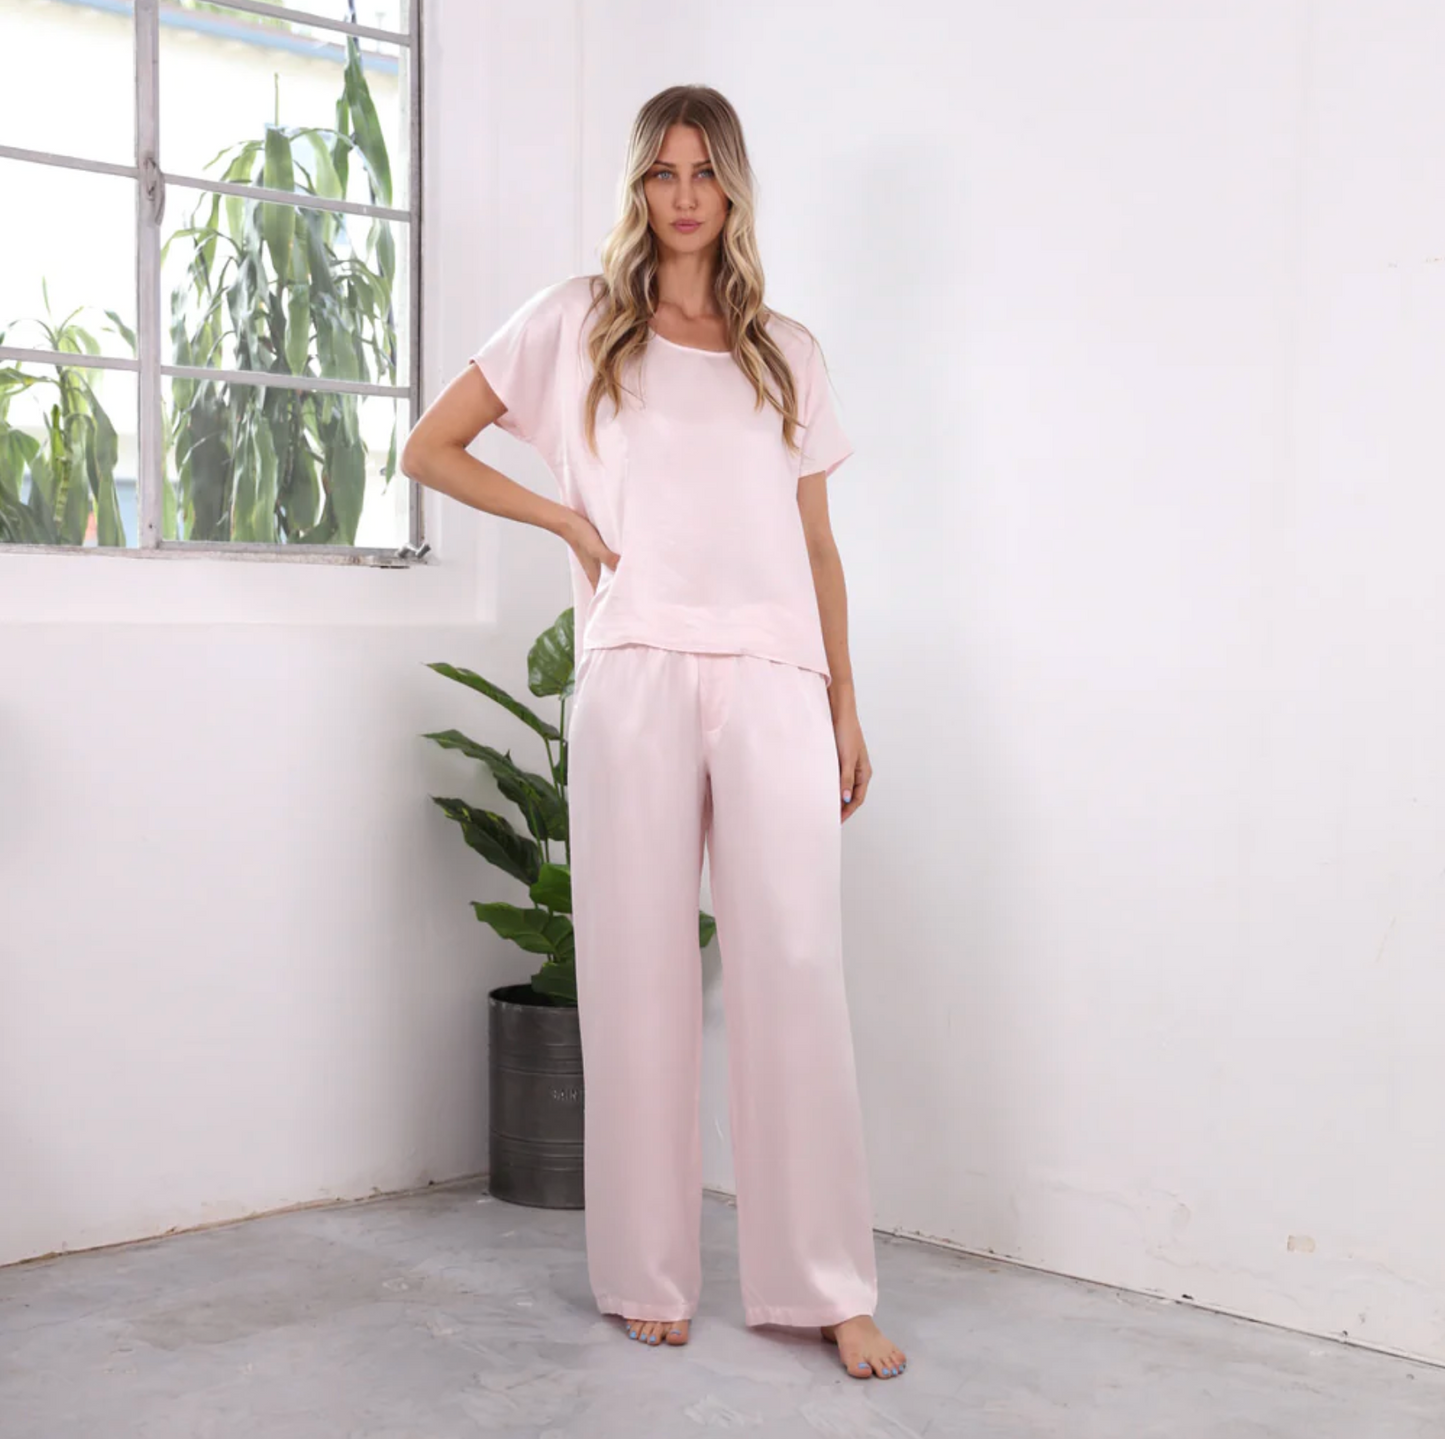 Jolie Satin Pant - The French Shoppe